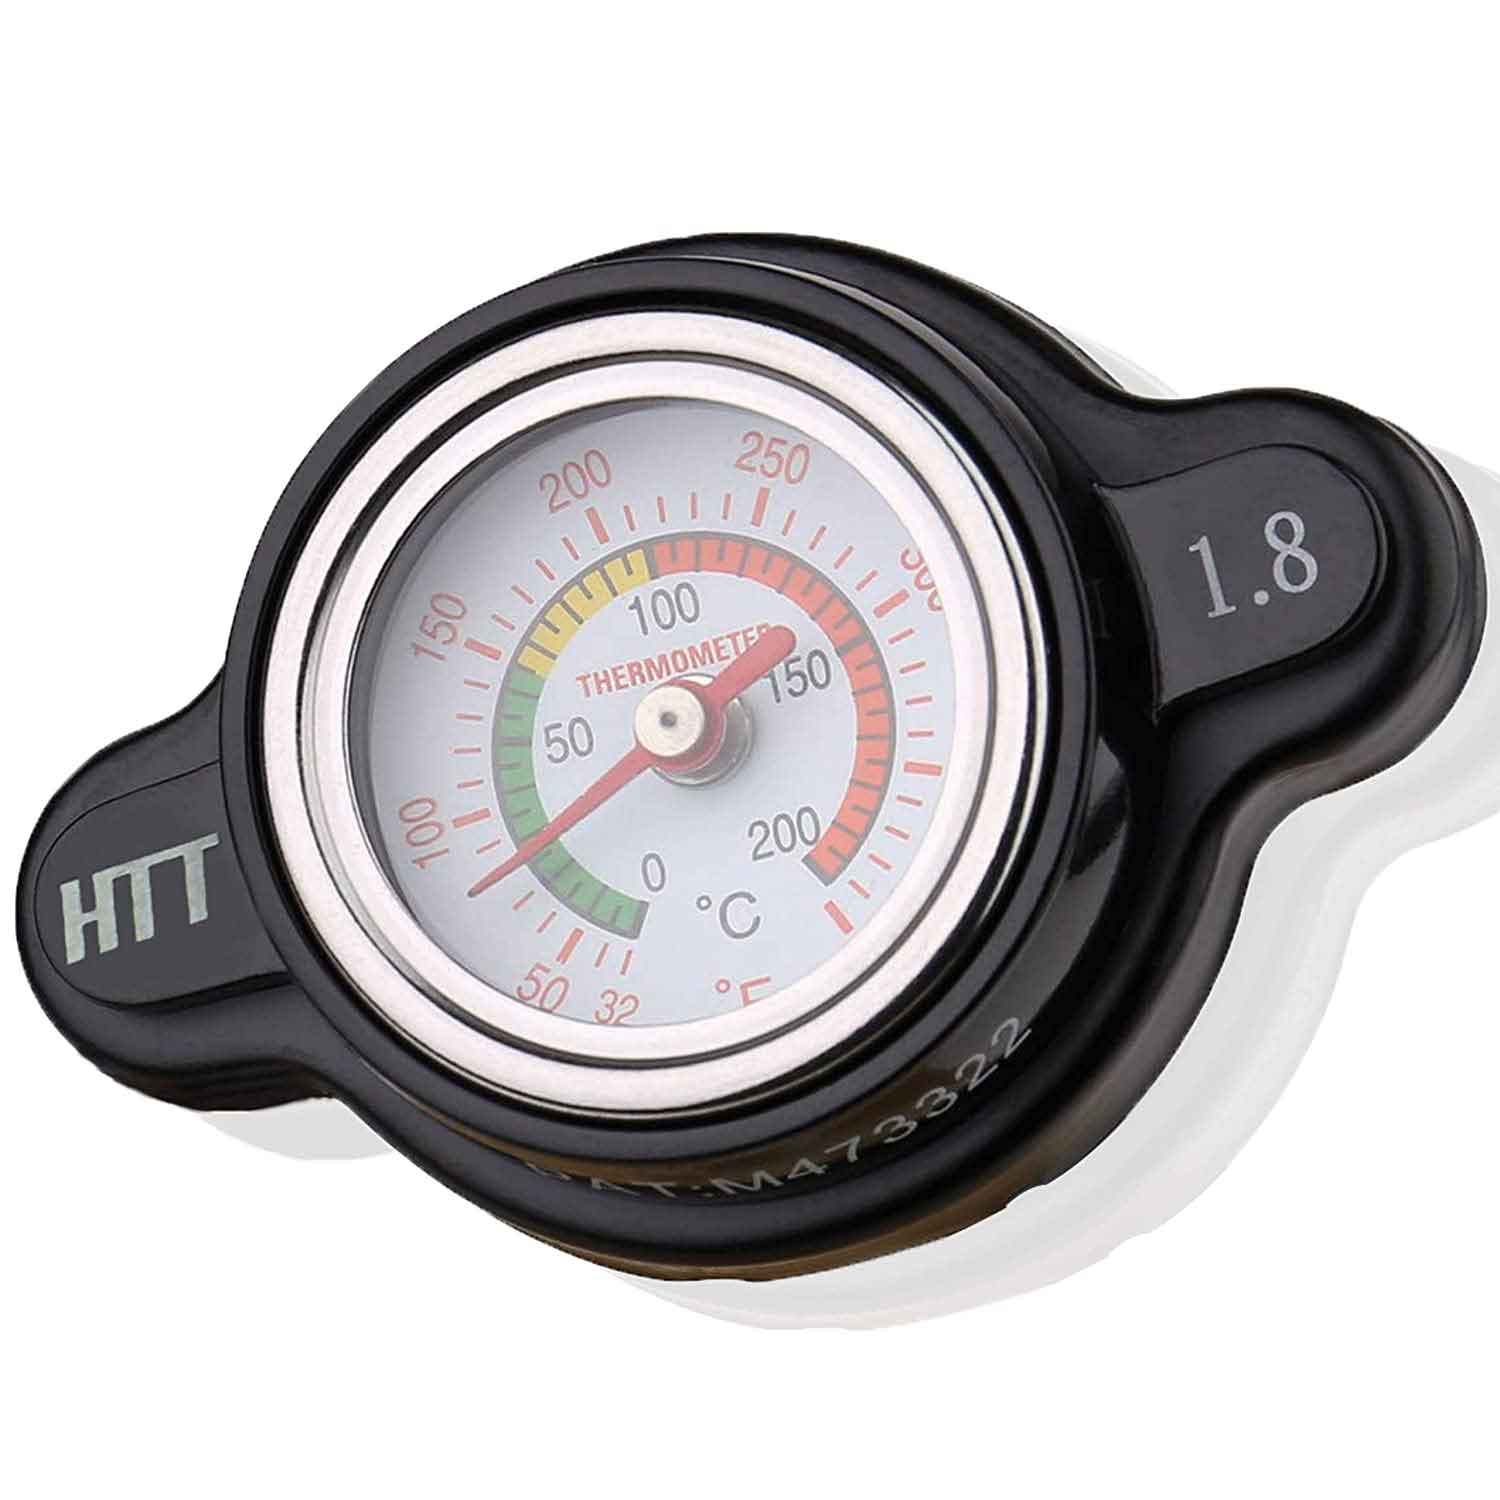 C62003-B - Motorcycle-Radiator-cap-for-most-Western-brand-Motorcycle-compatible-with-the-KTM-Group-motorcycle-before-2016